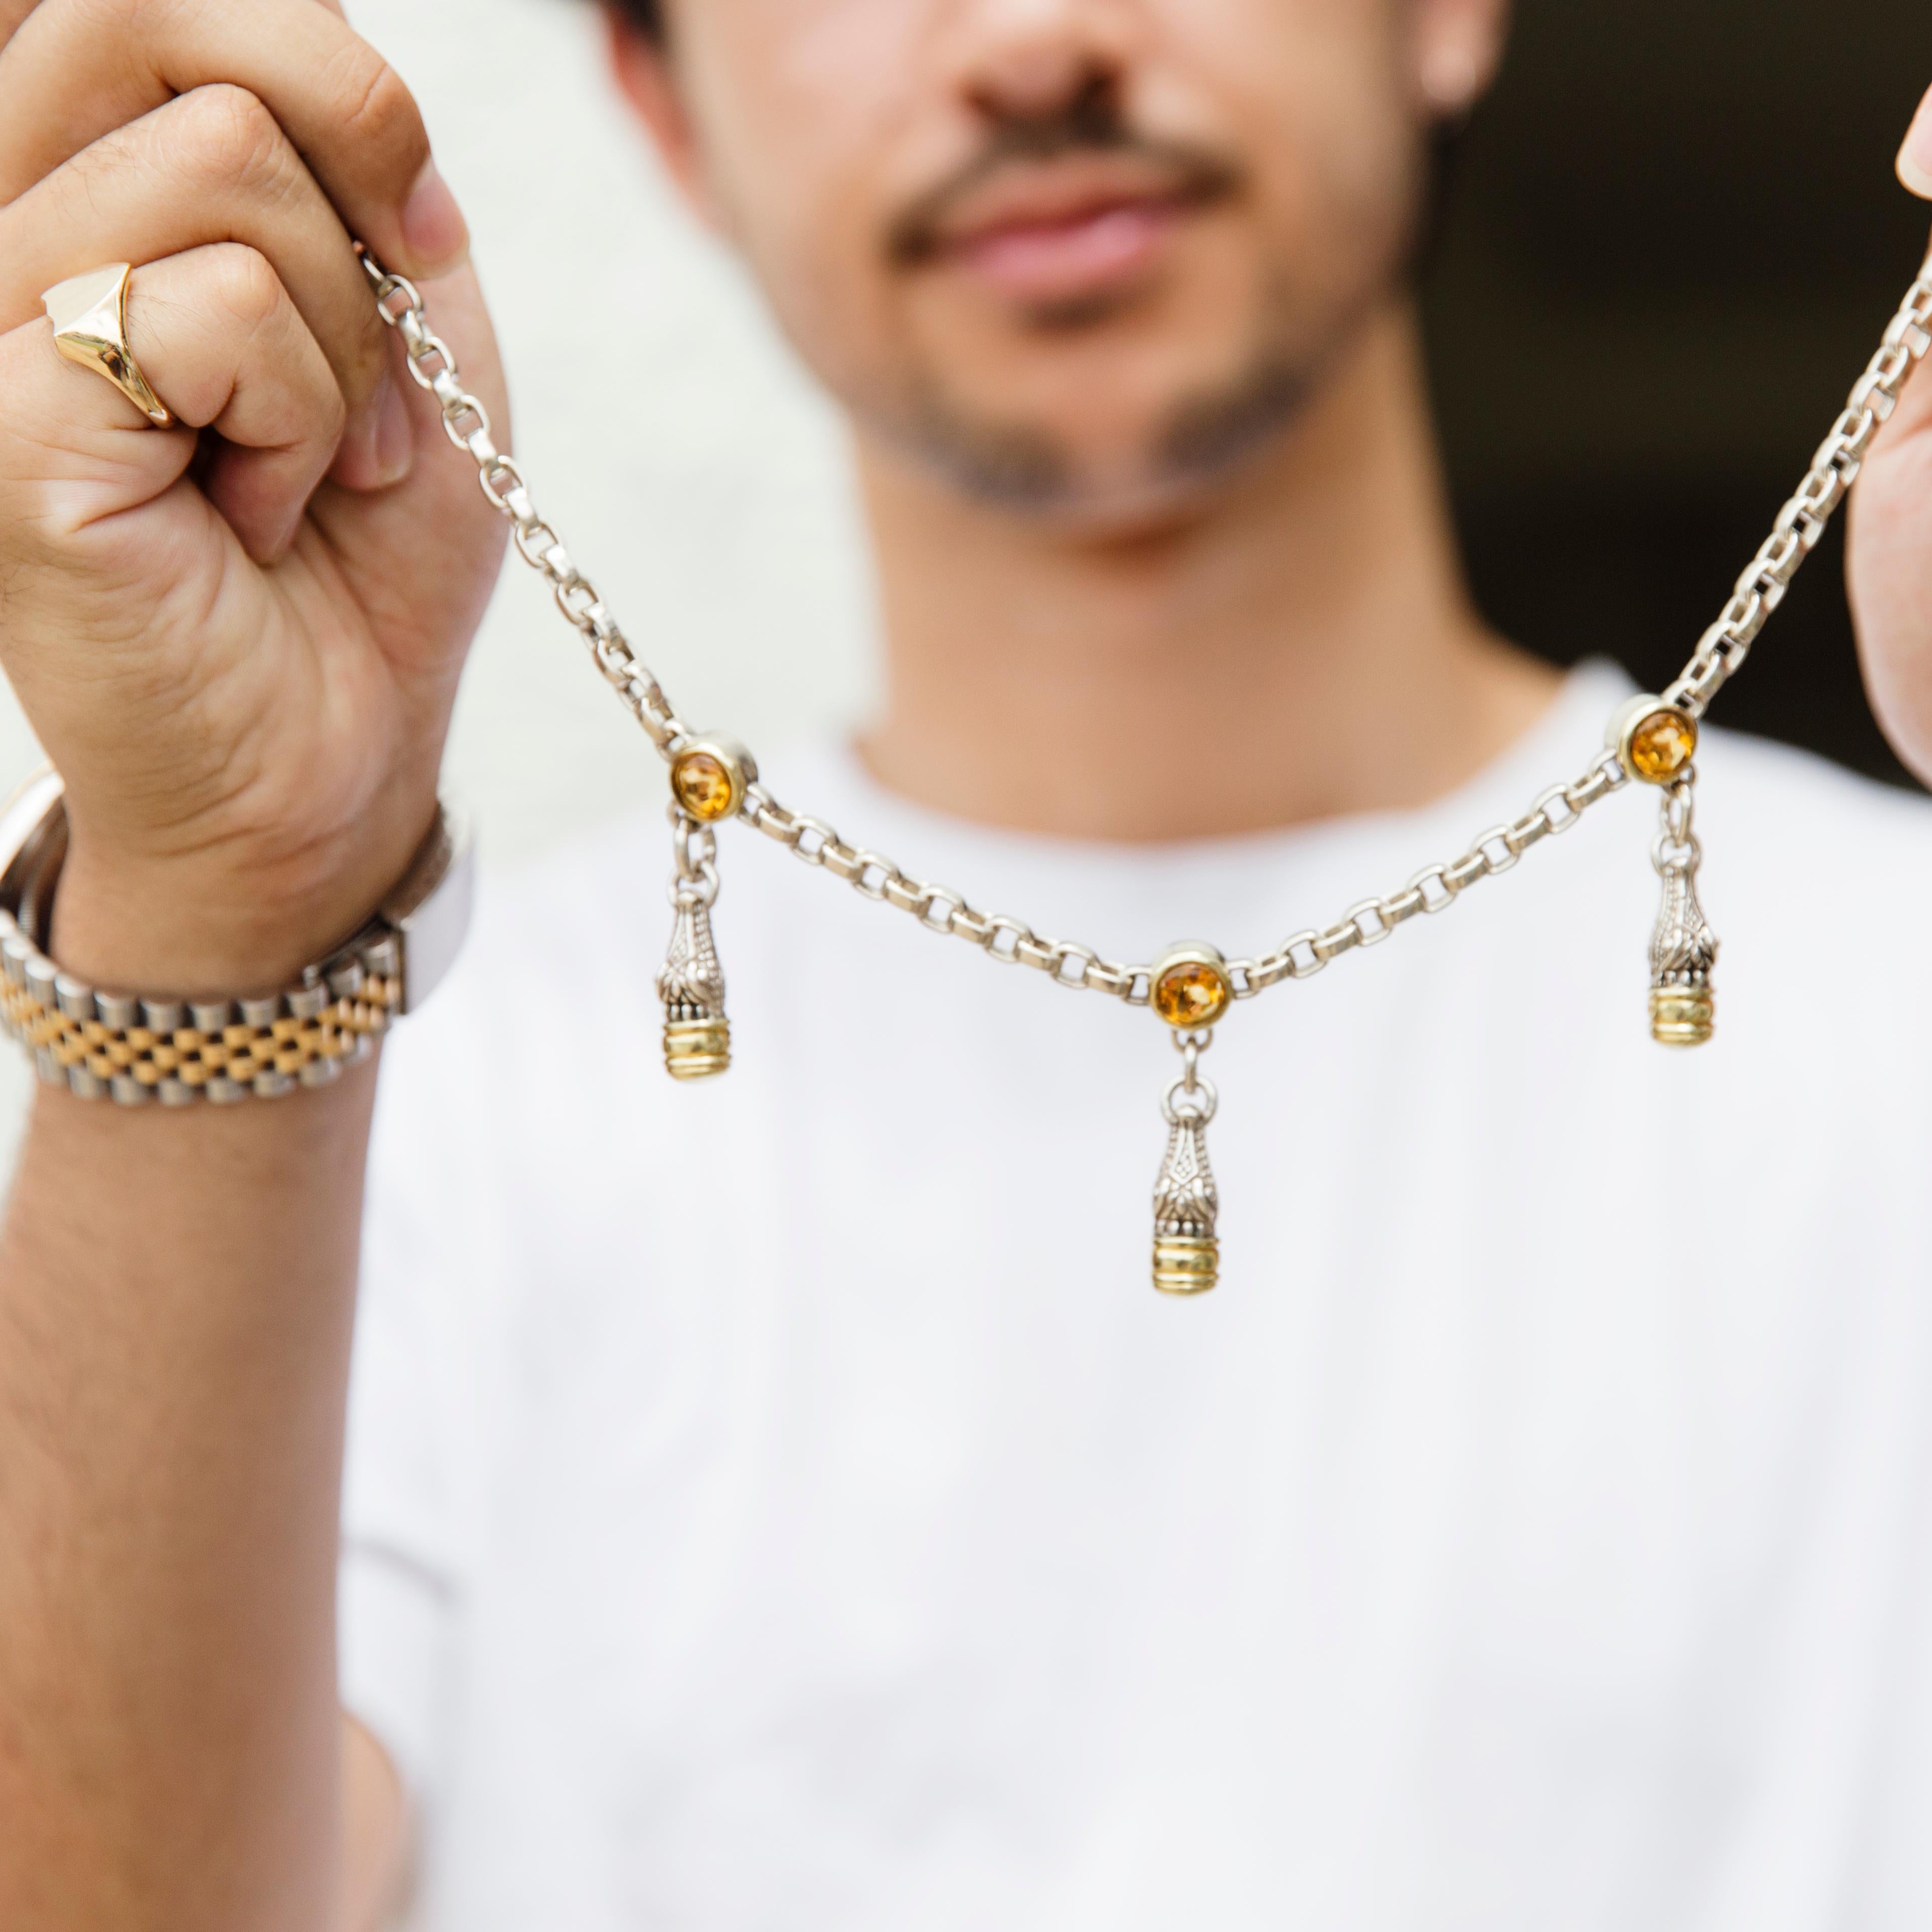 Forged in sterling silver and 14 carat yellow gold, this unique and genuine Barry Kieslestein toggle necklace features three silver and 14 carat yellow gold Alligator heads, along the length of the sterling silver chain, and hang from three